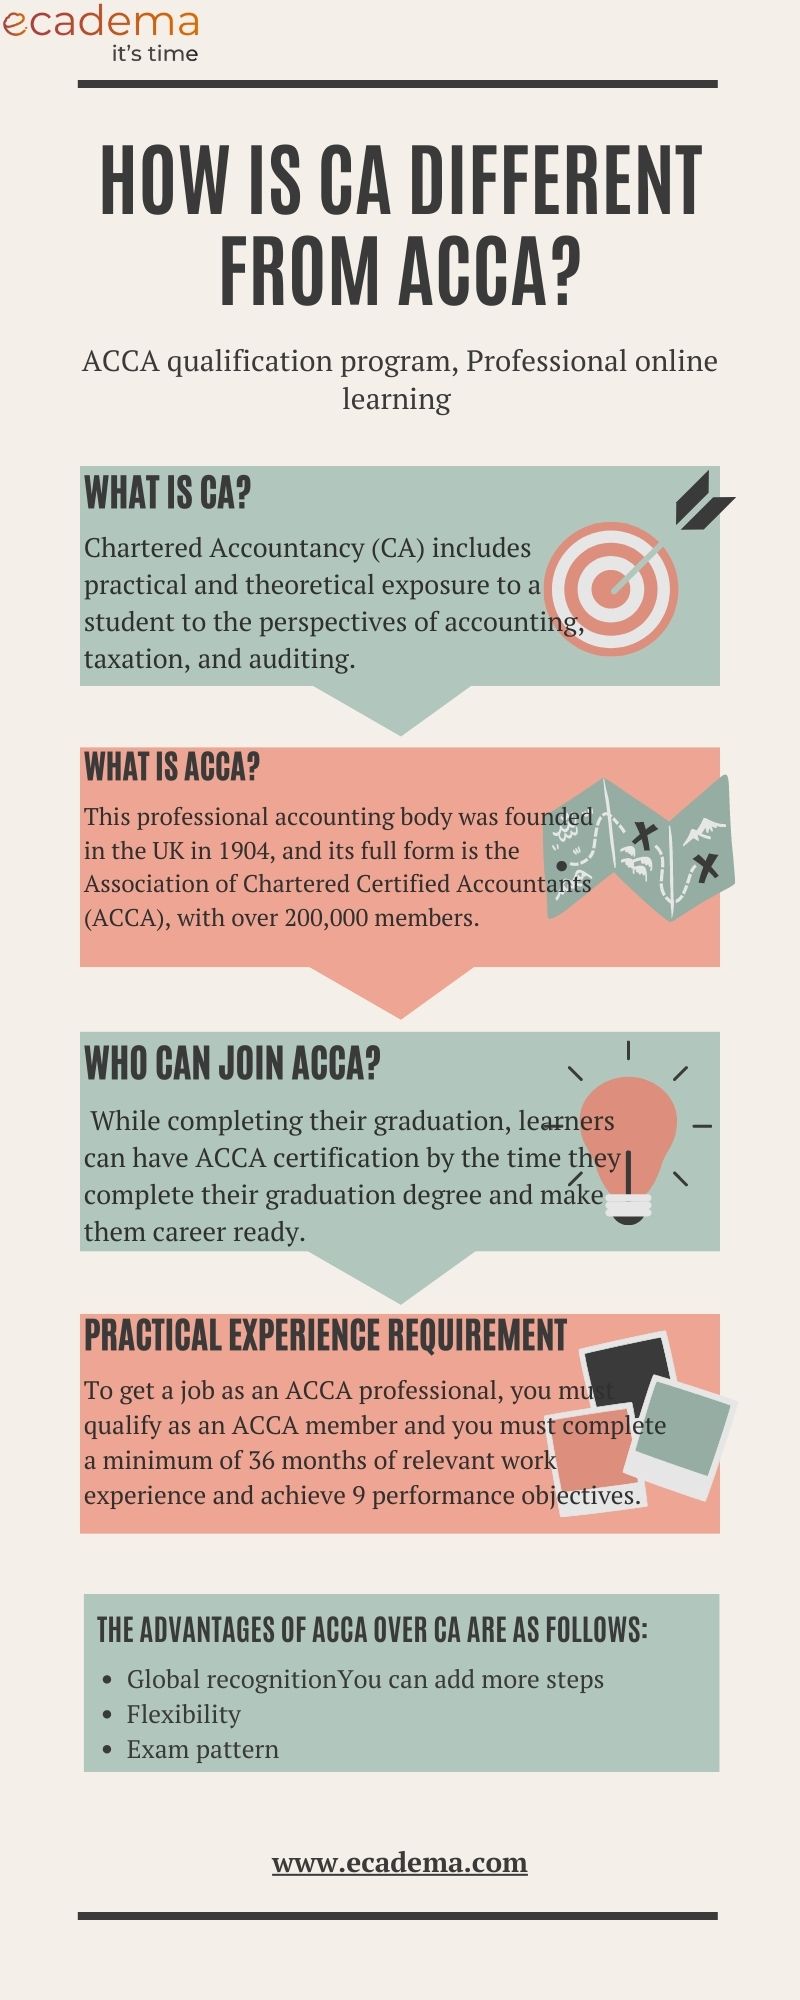 How is CA different from ACCA.jpg  by ecadema